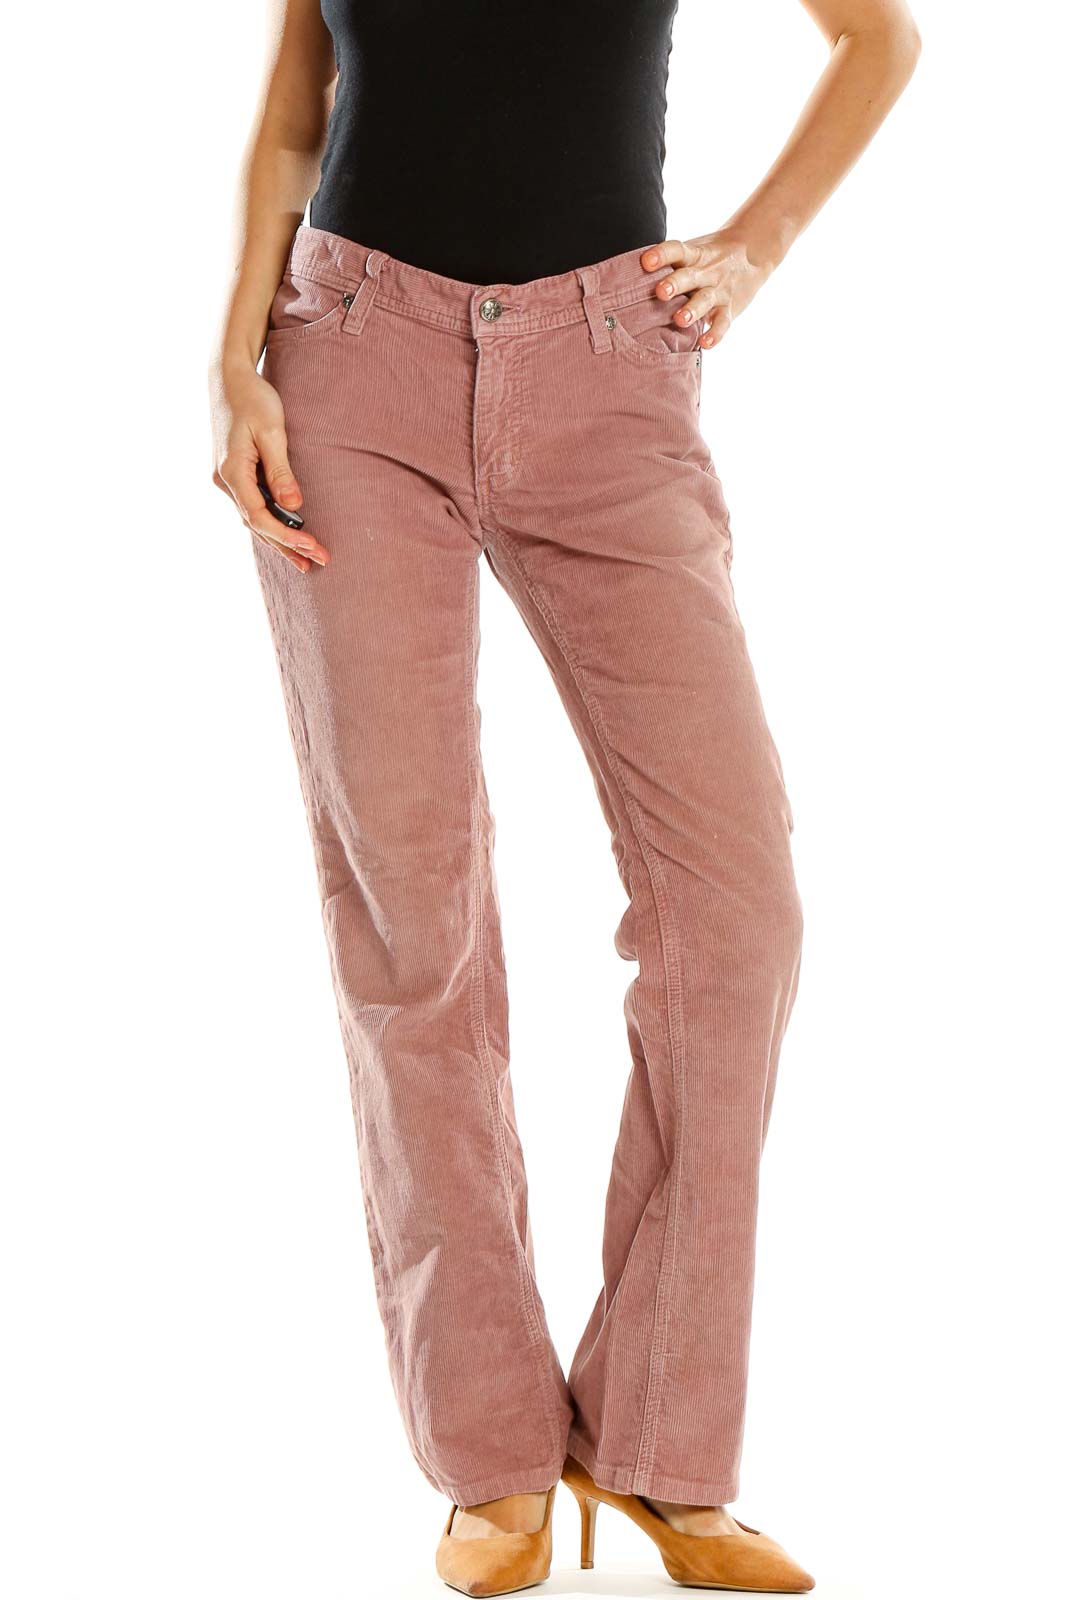 Pink Corduroy Casual Flare Pants Front